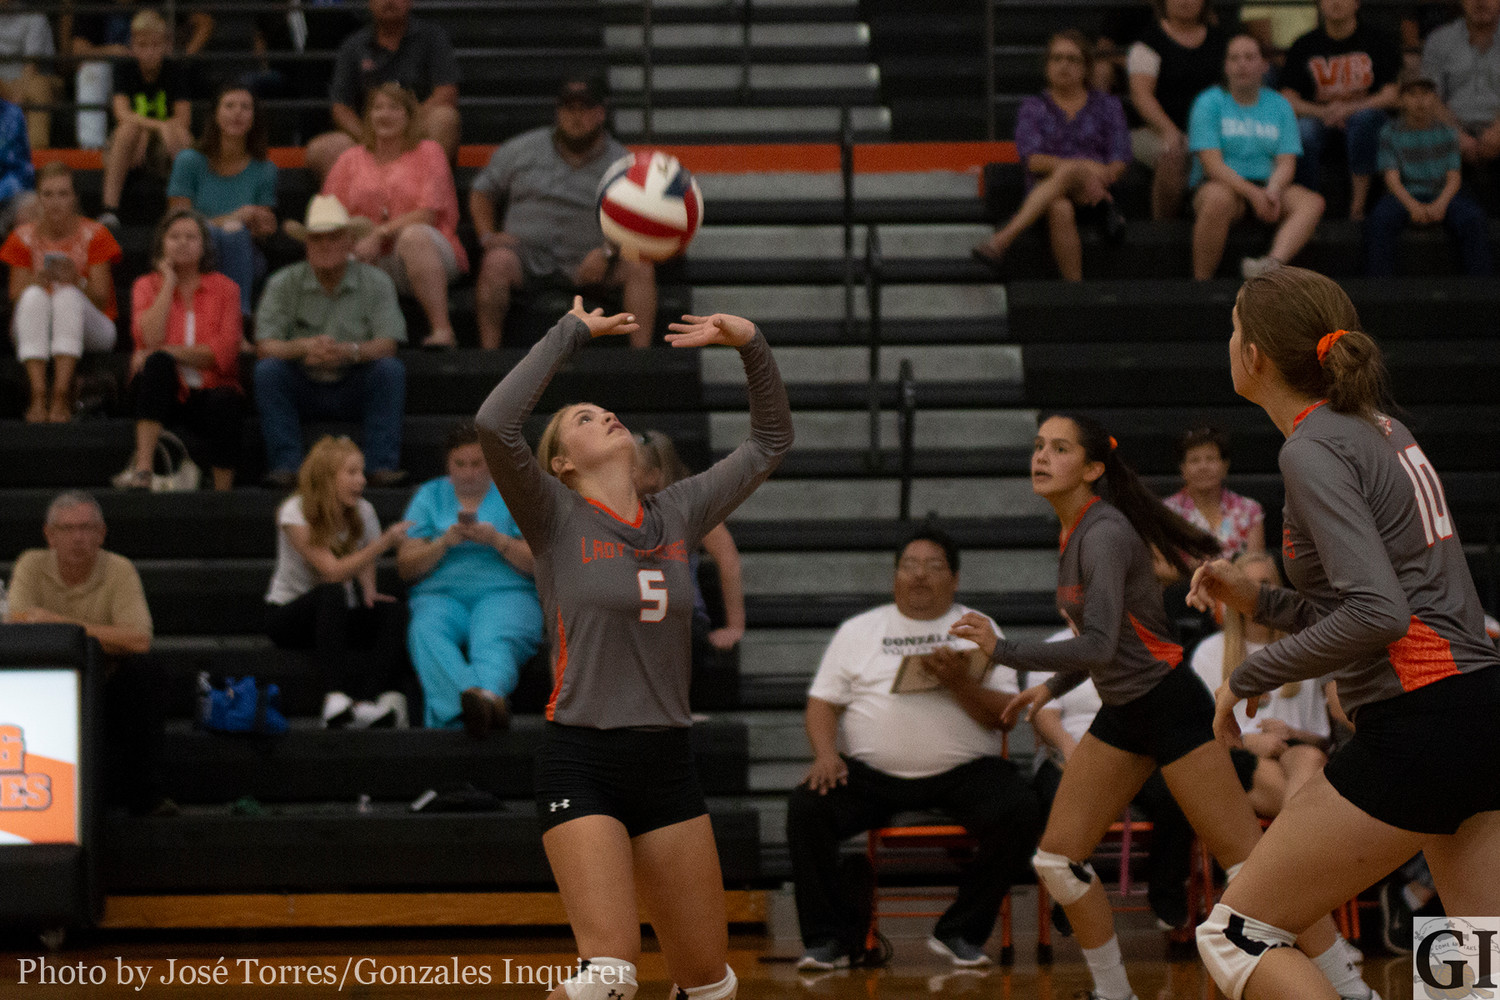 Kiley Allen runs the offense as the setter for the Gonzales Apaches this season. With many attackers on the court, head coach Sam White expects Allen to be the main facilitator throughout the year. Gonzales beat Luling (25-22, 25-14, 25-16).